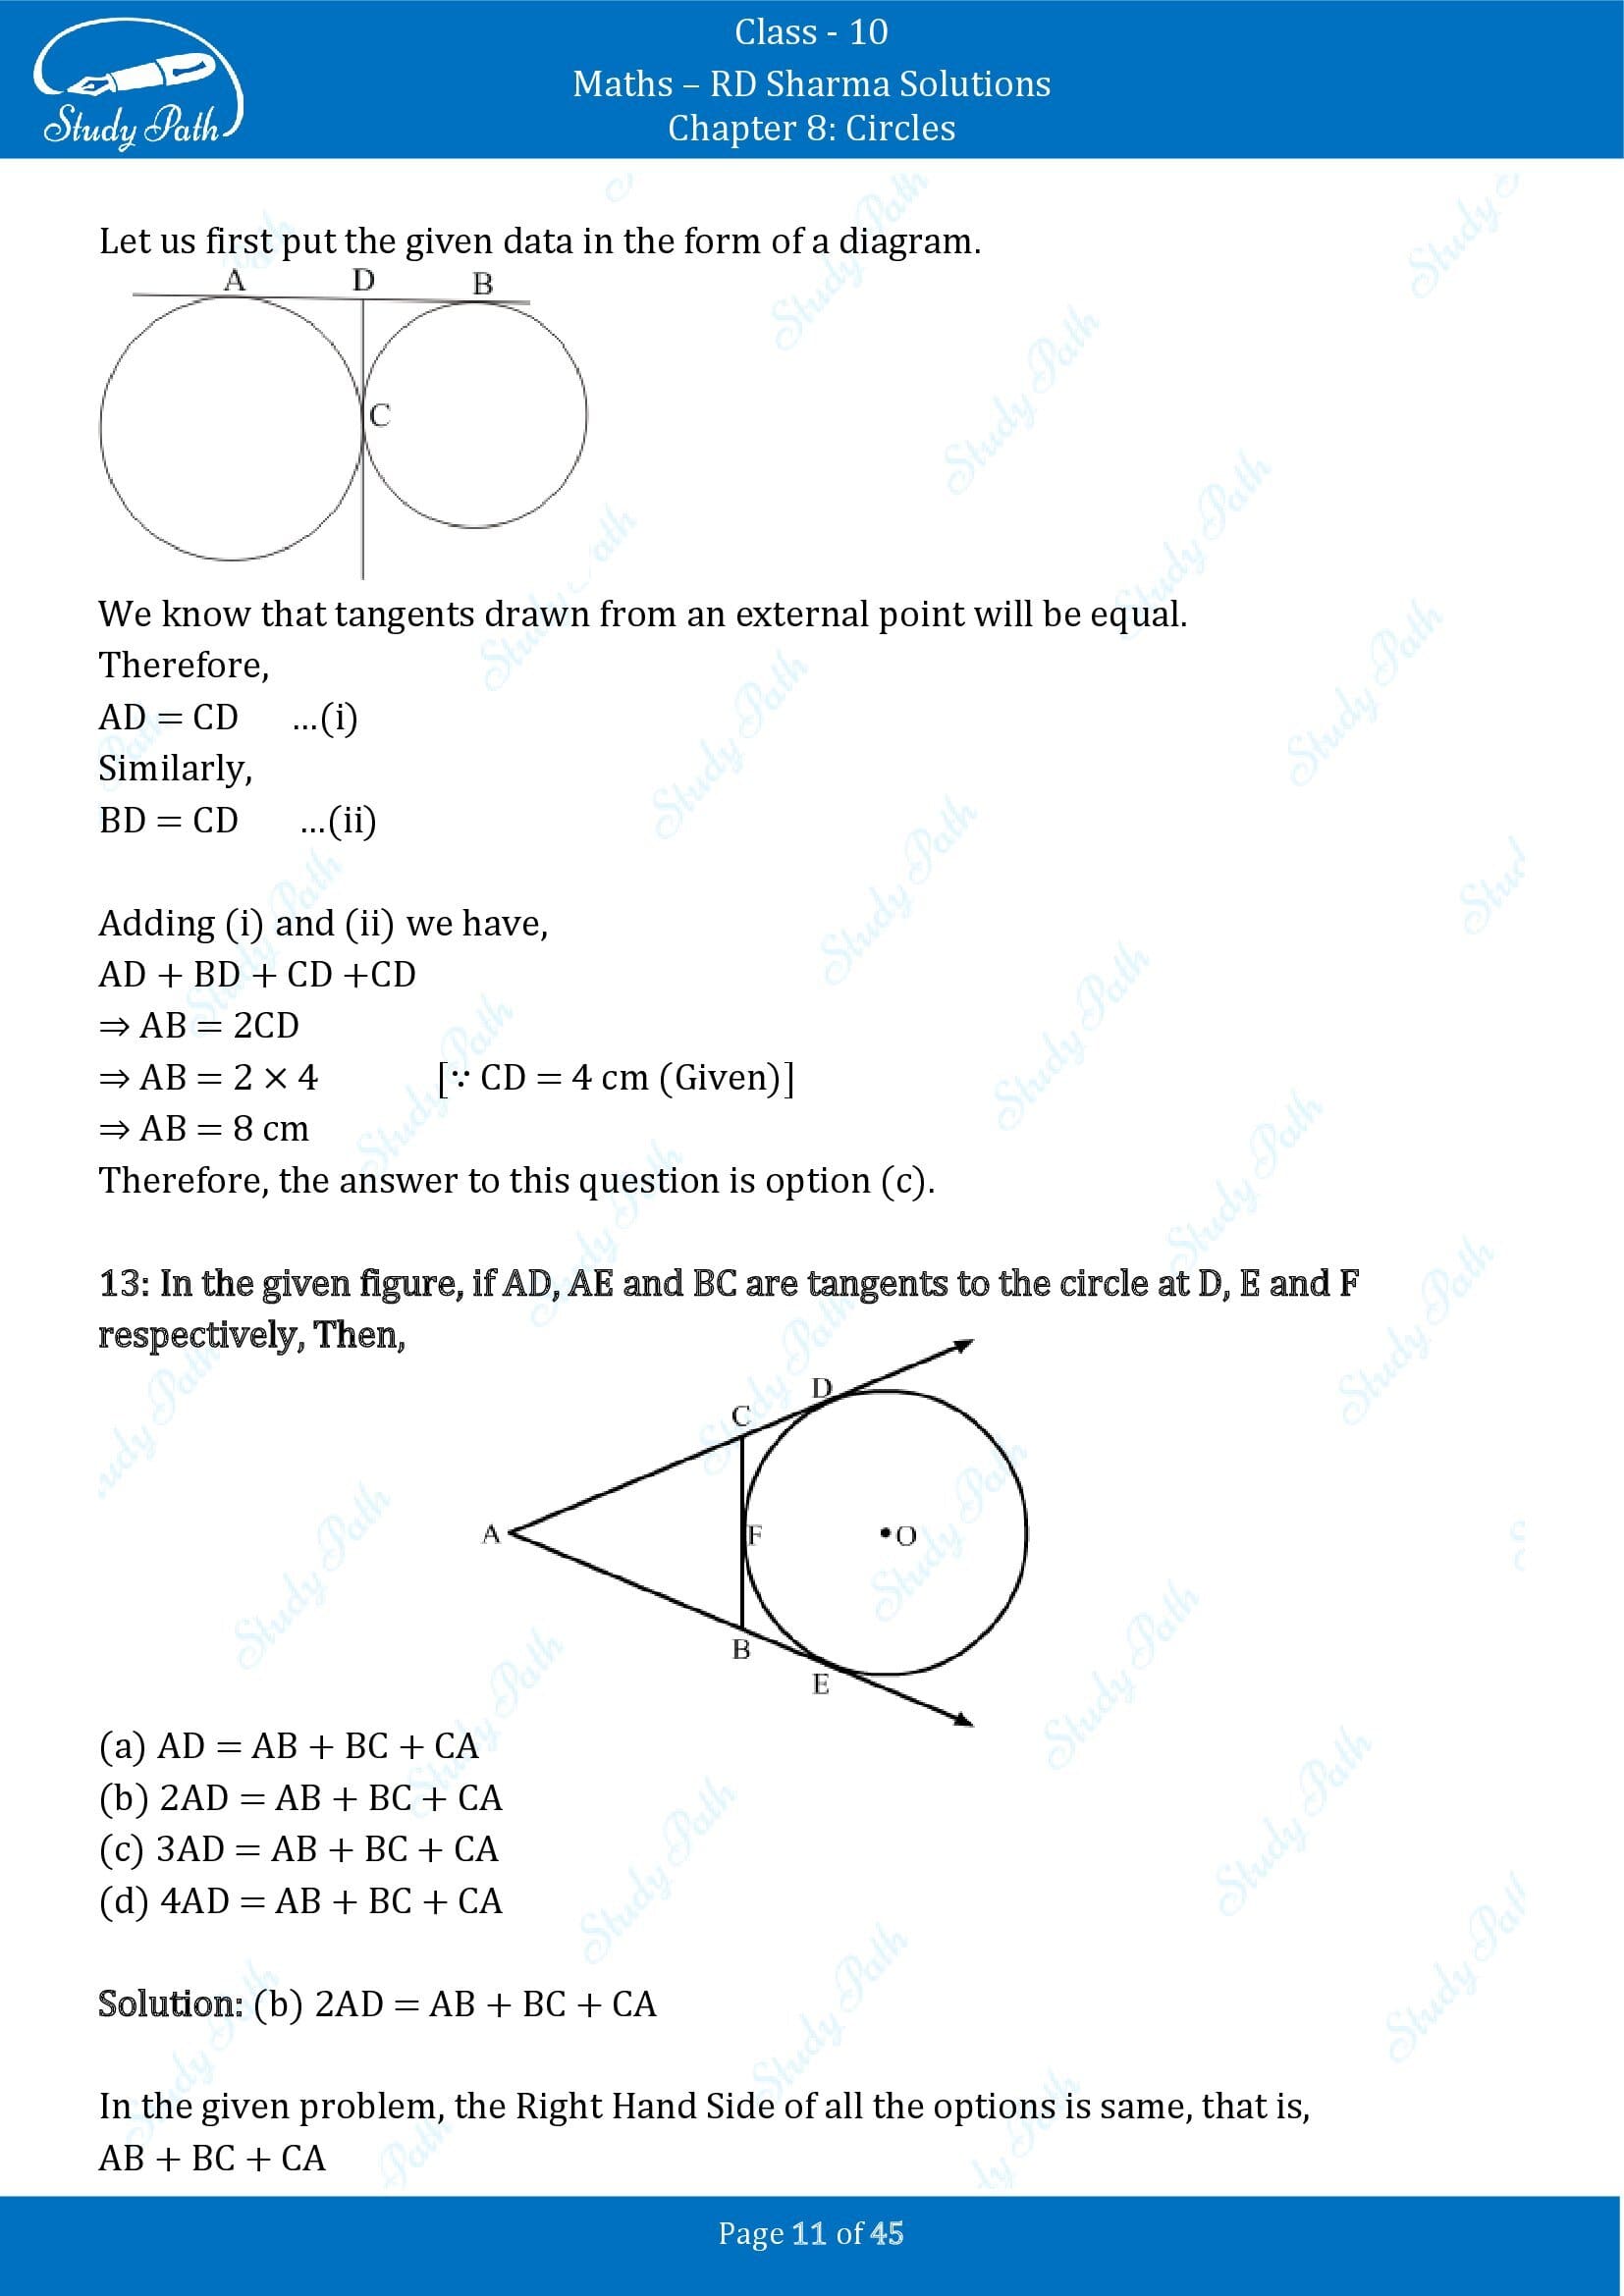 RD Sharma Solutions Class 10 Chapter 8 Circles Multiple Choice Questions MCQs 00011